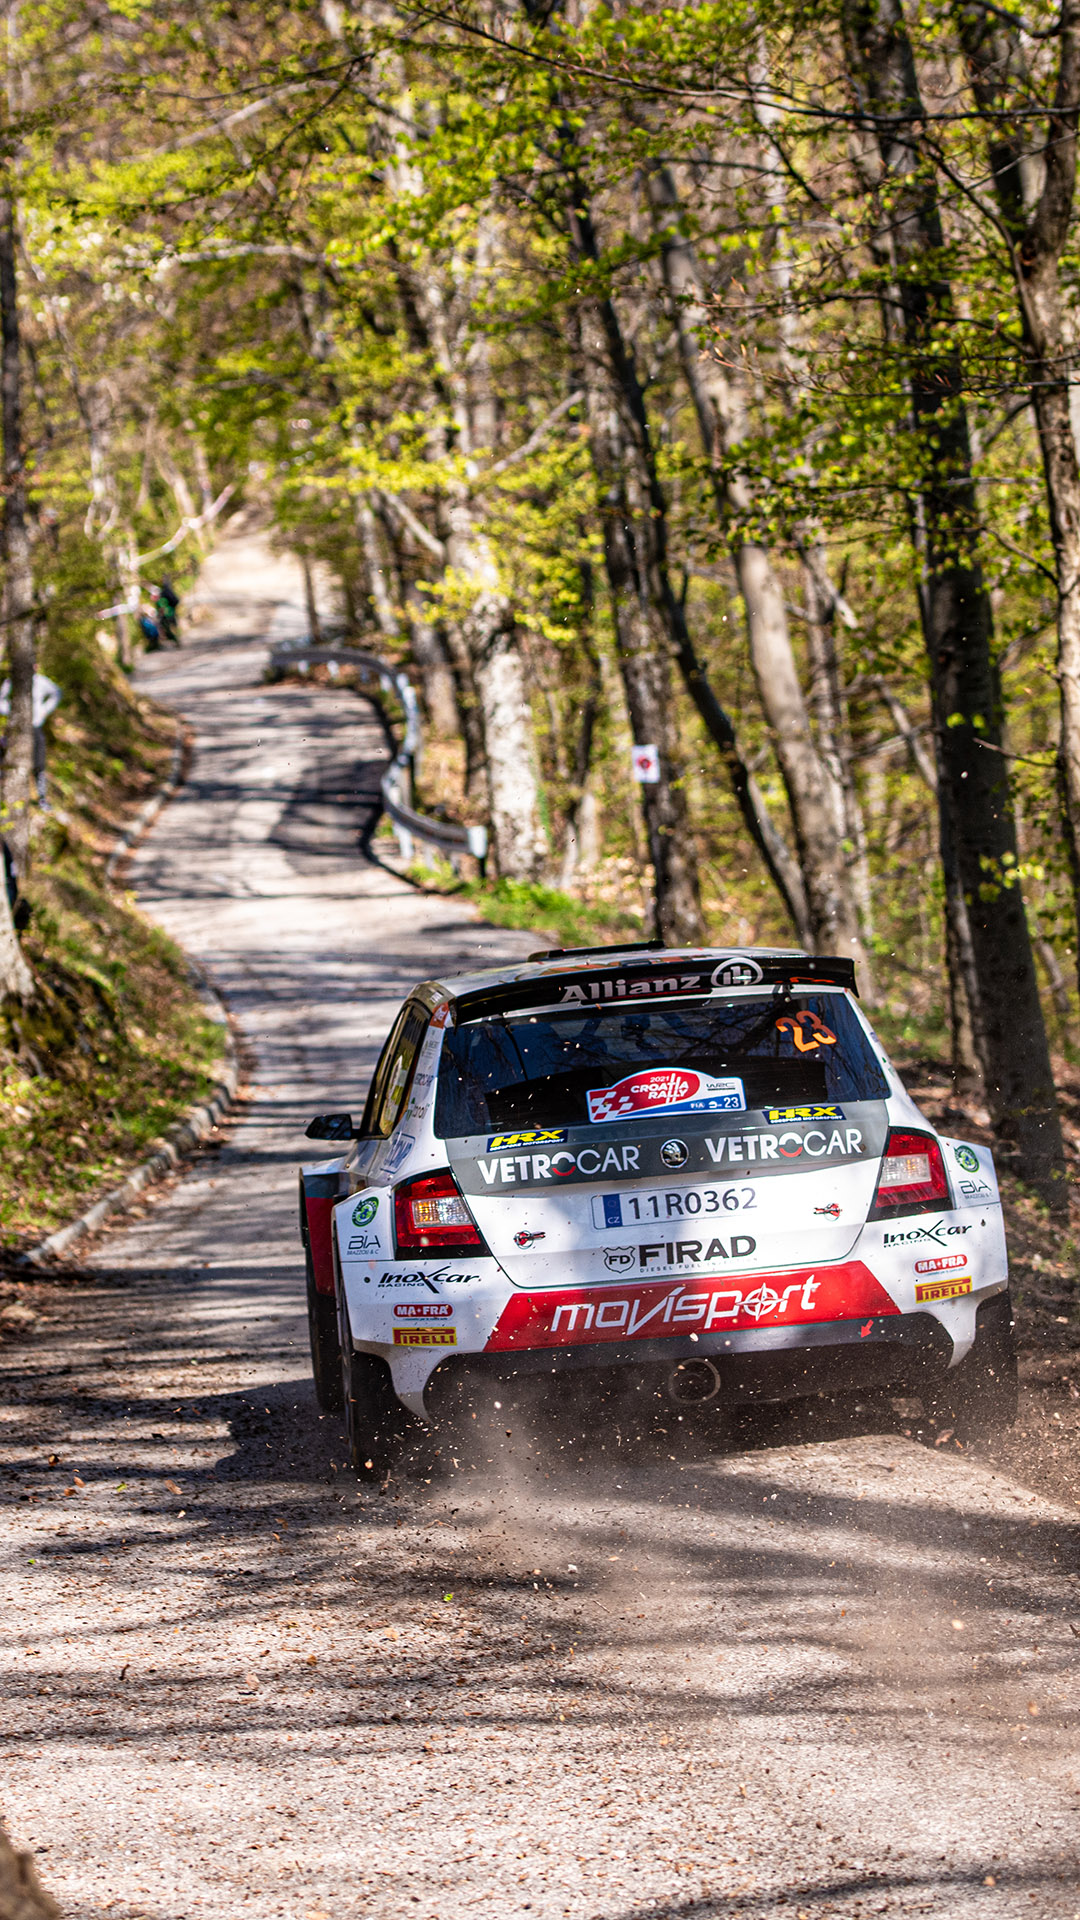 Download croatia rally wallpapers for your phone